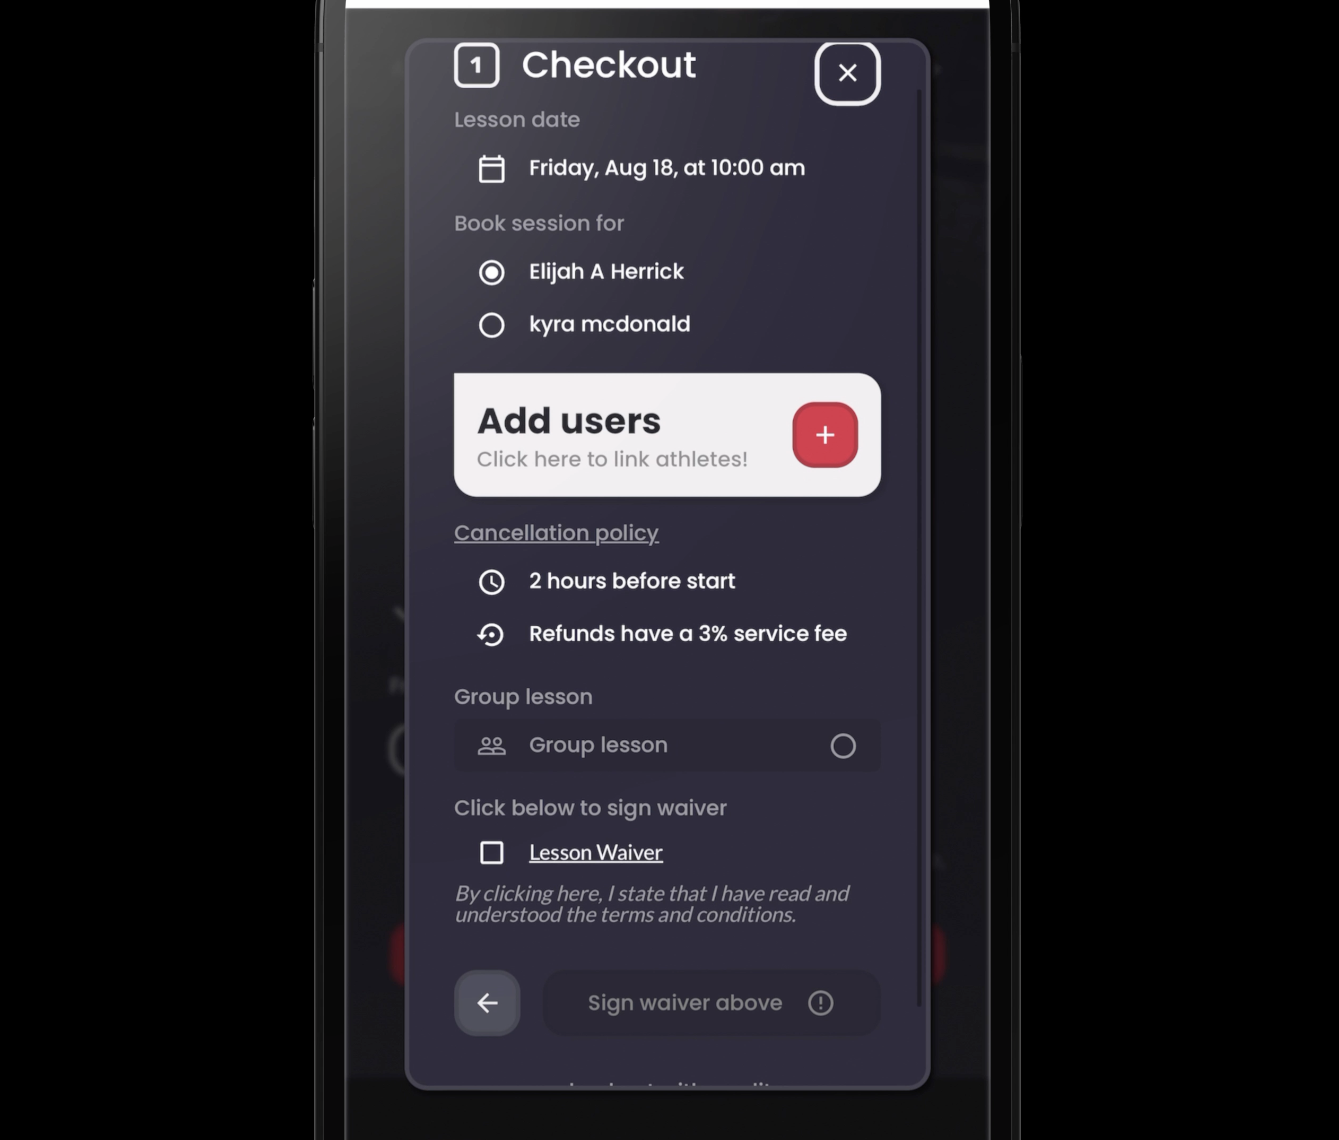 Mobile-first checkout flows with automated upselling and family checkout makes complex checkout a breeze